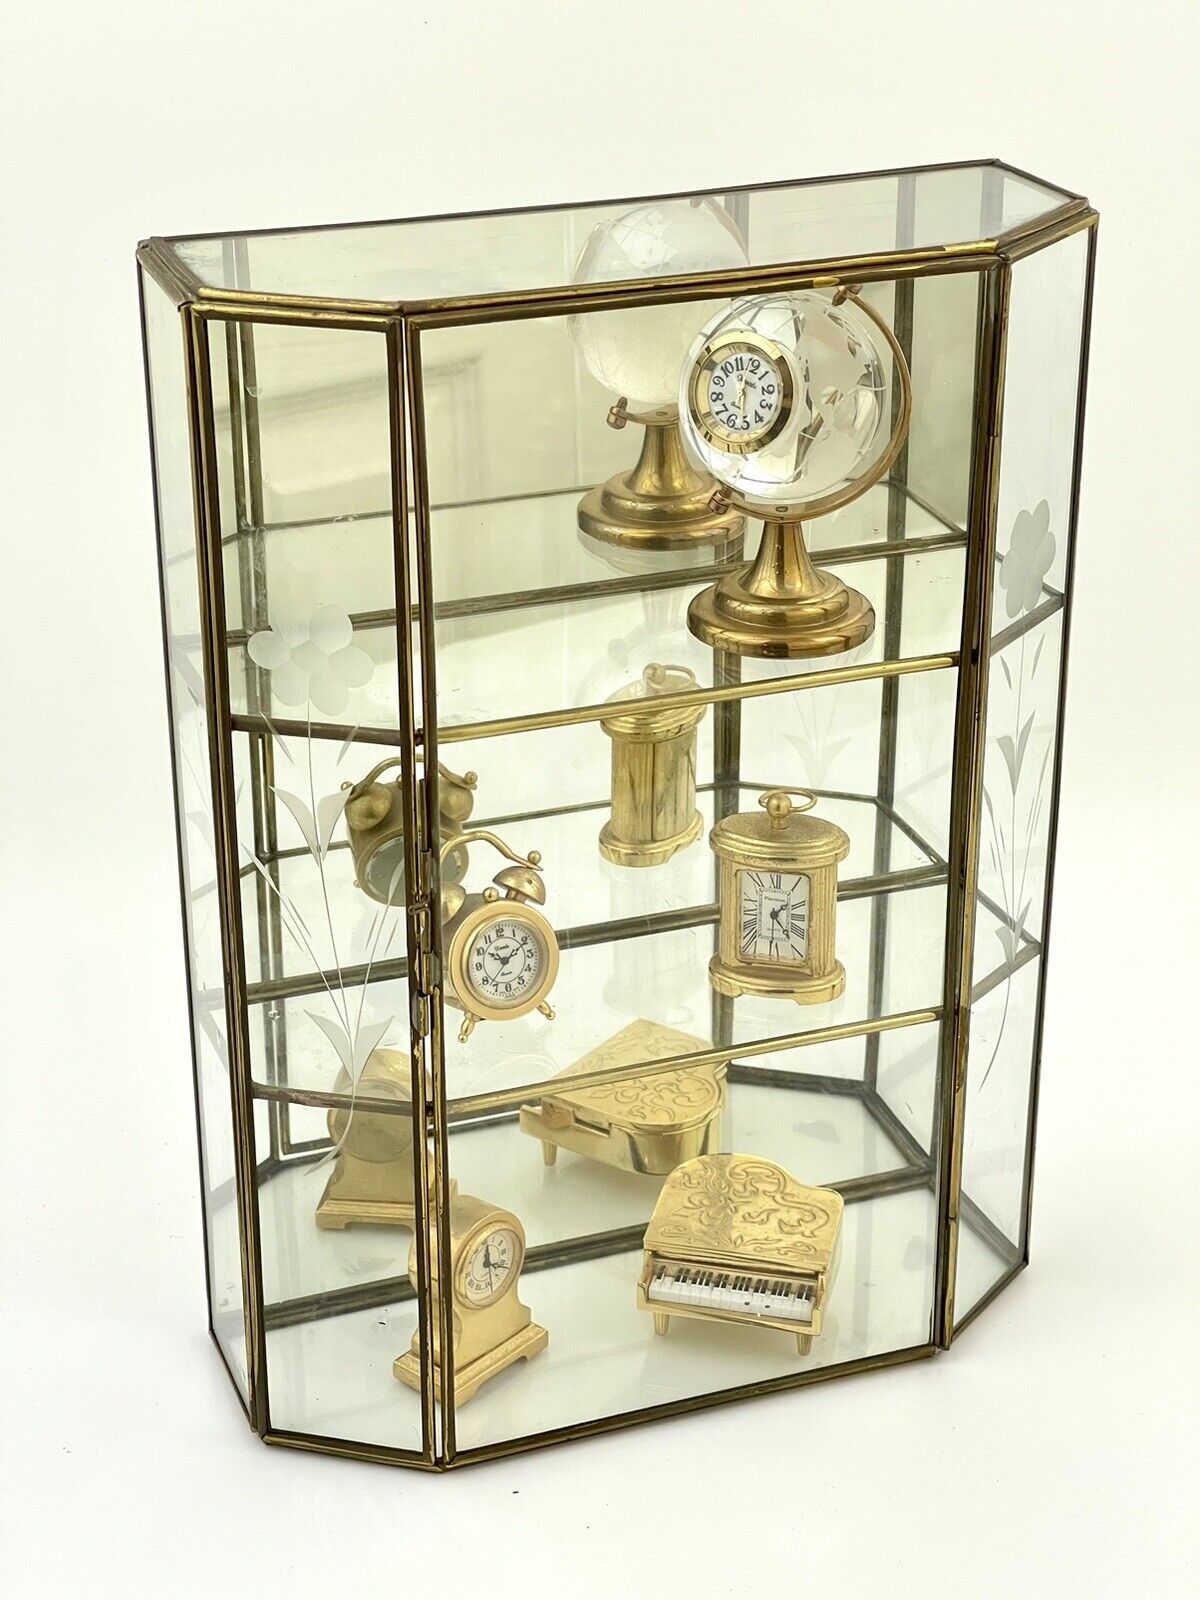 Vintage Etched Glass Brass Display Case Curio Cabinet Wall Shelf Miniature Clock